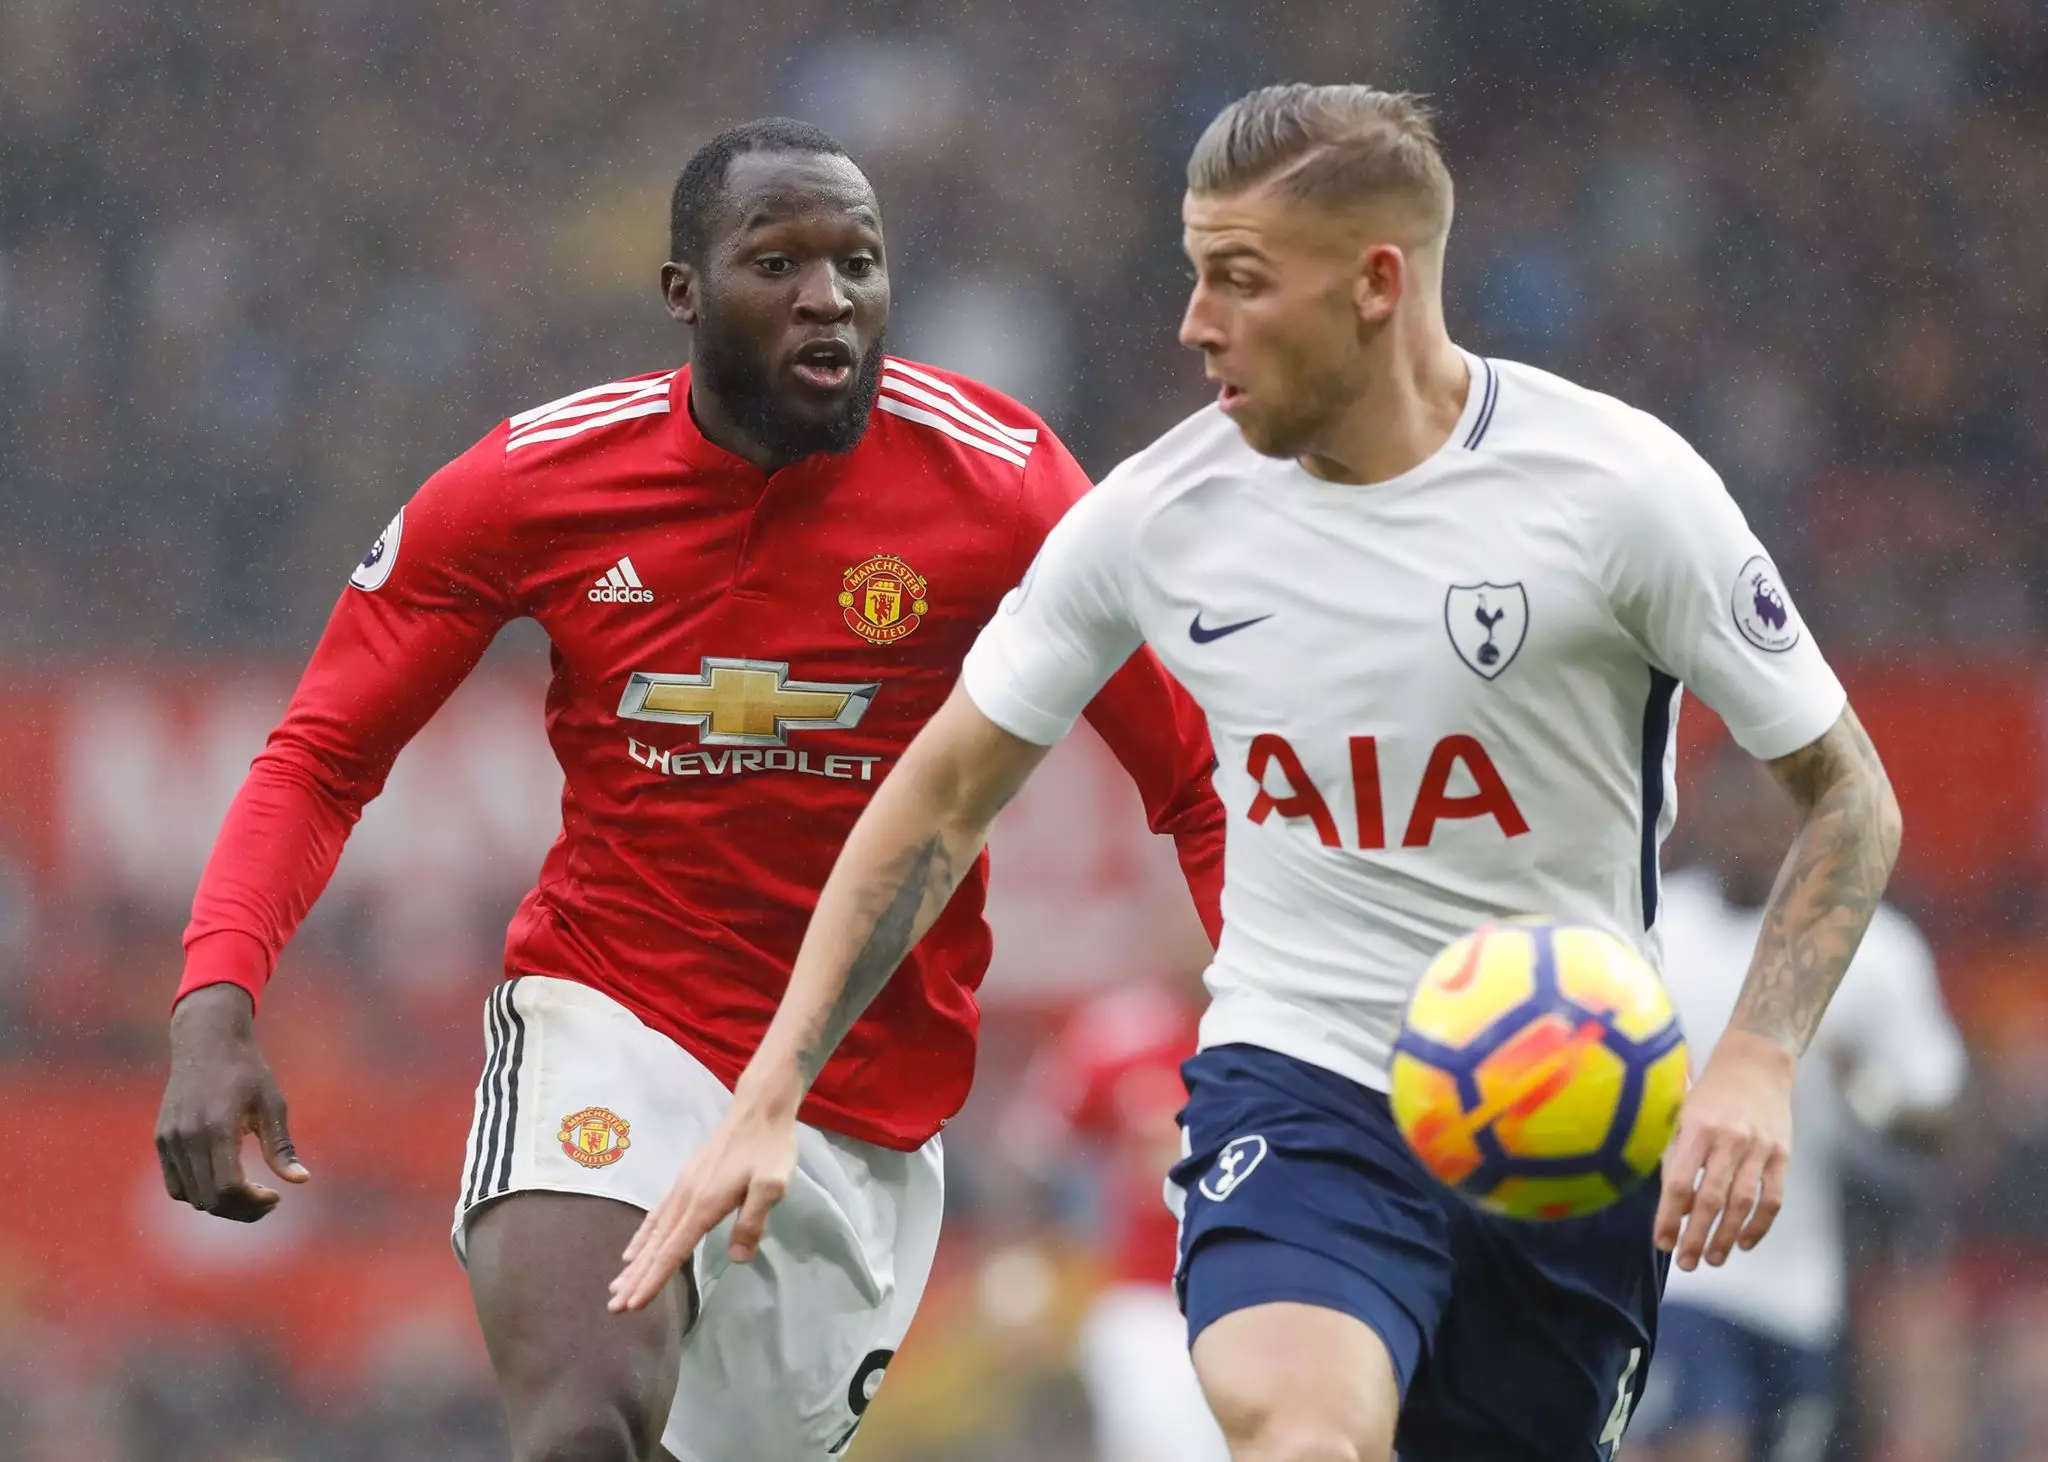 Alderweireld would be better than Jones, Smalling, Bailly or Lindelof. Image: PA Images